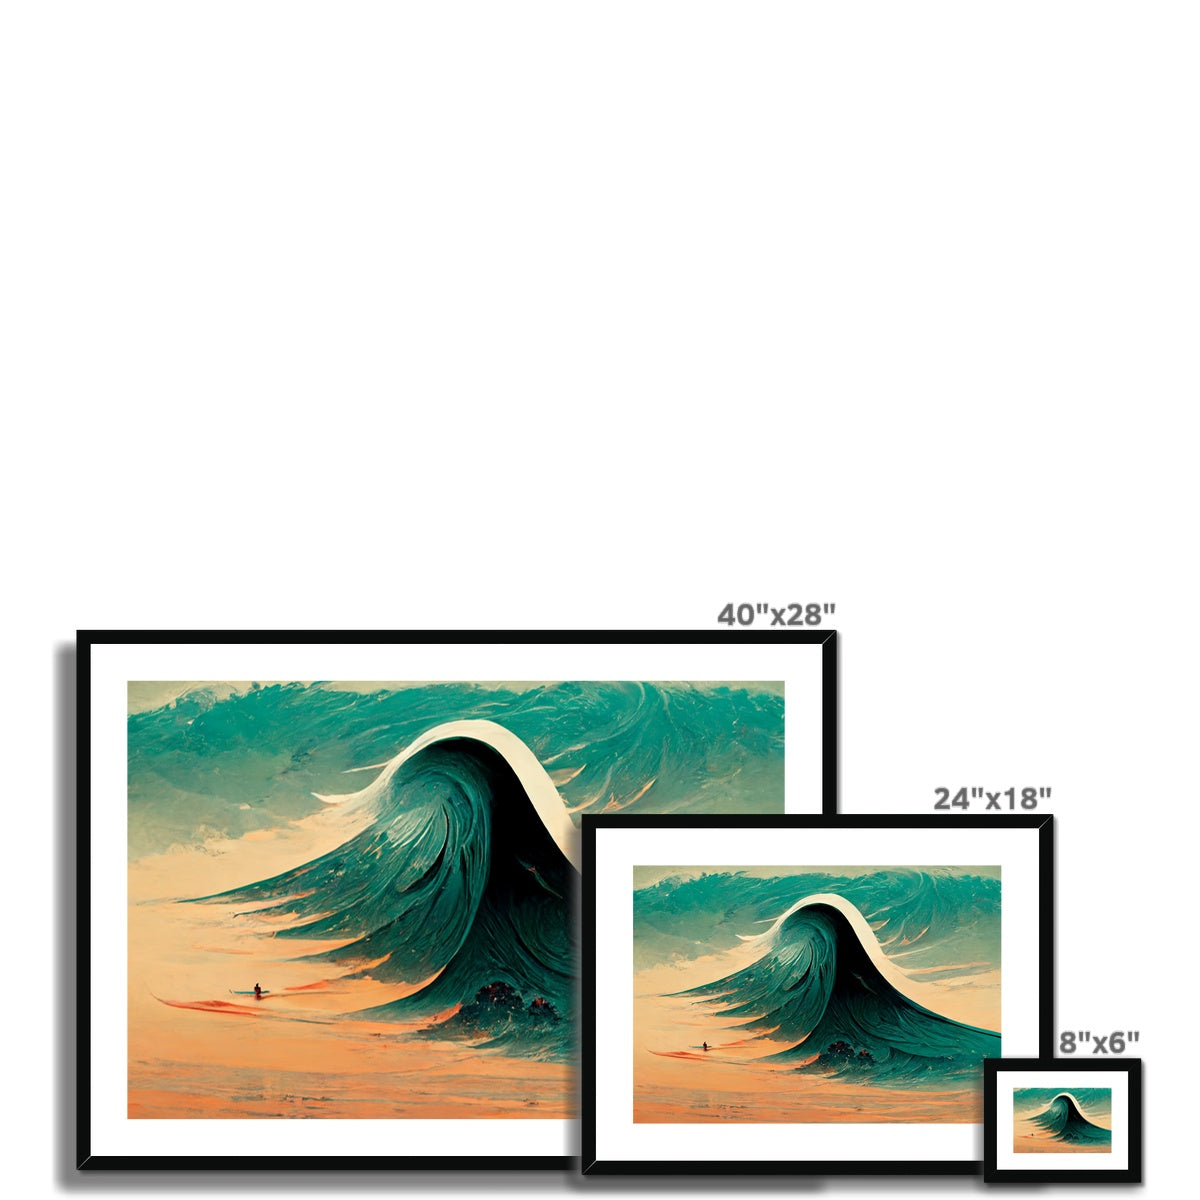 The Swell Framed & Mounted Print